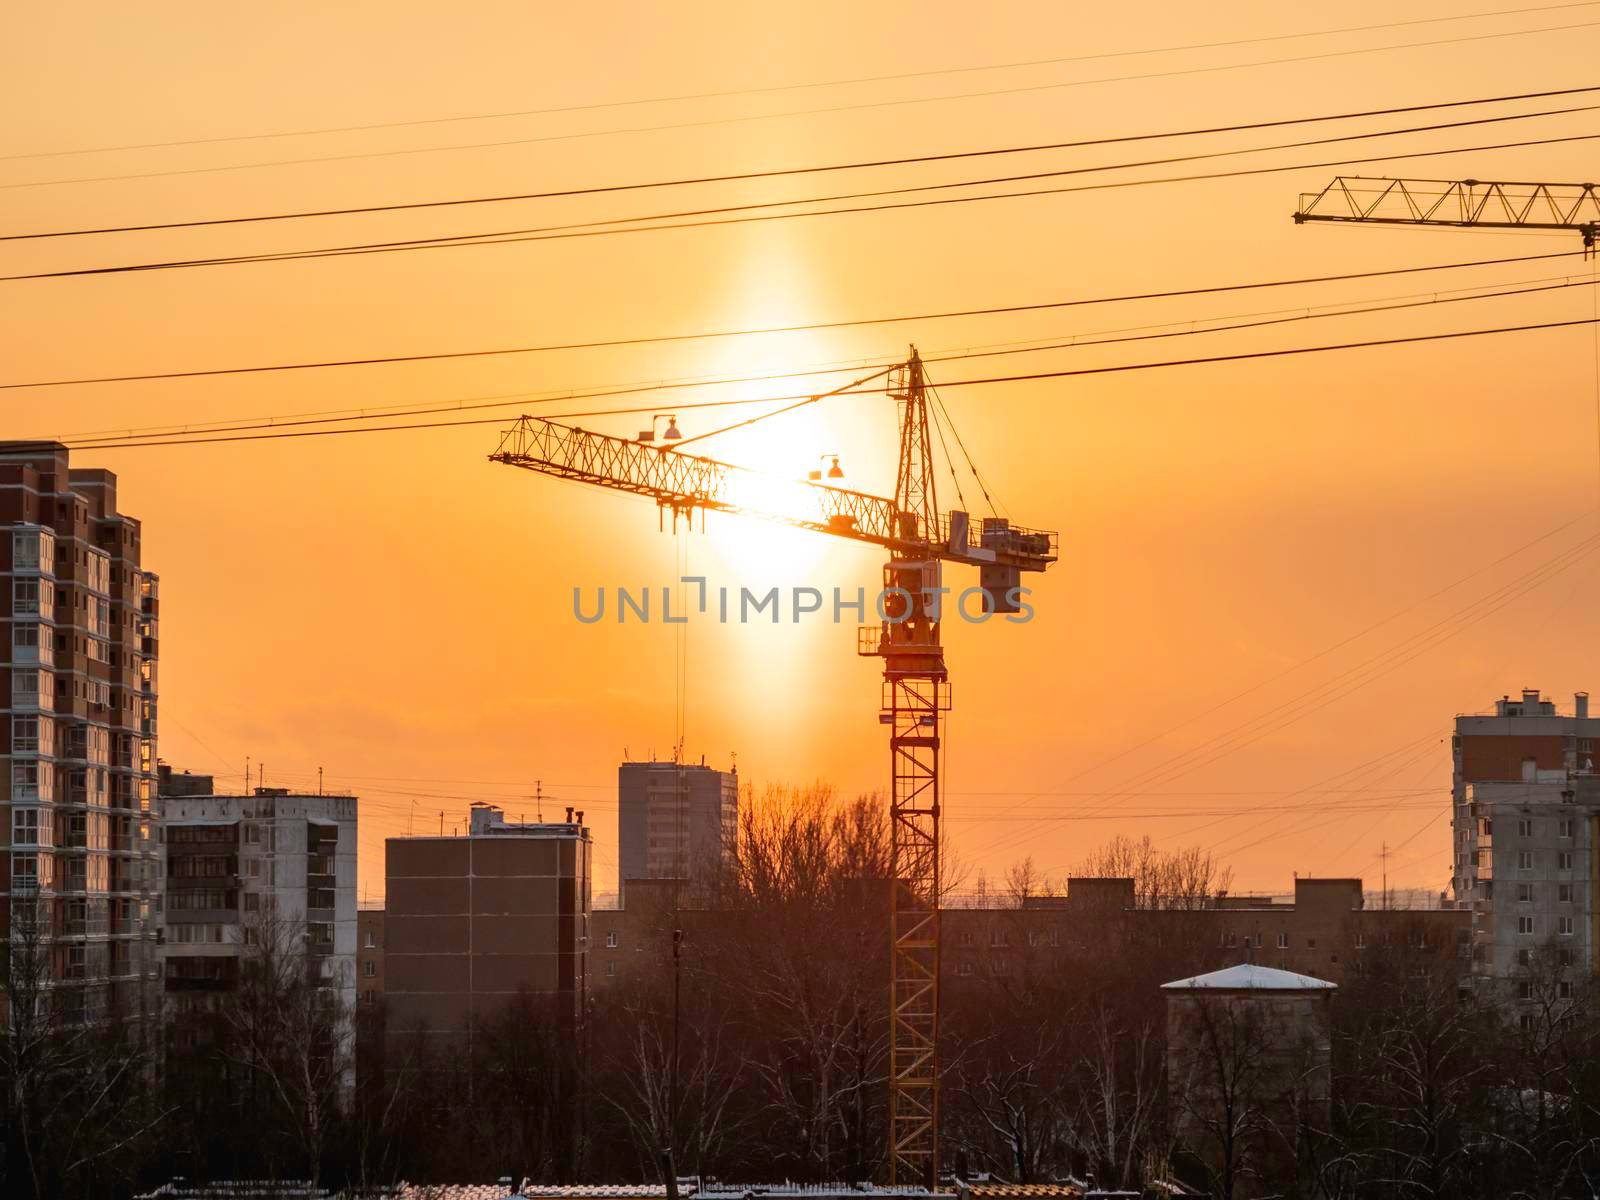 Construction of residential district. Unfinished apartment building with protruding fittings. Silhouettes of walls on the background of an orange sunset.